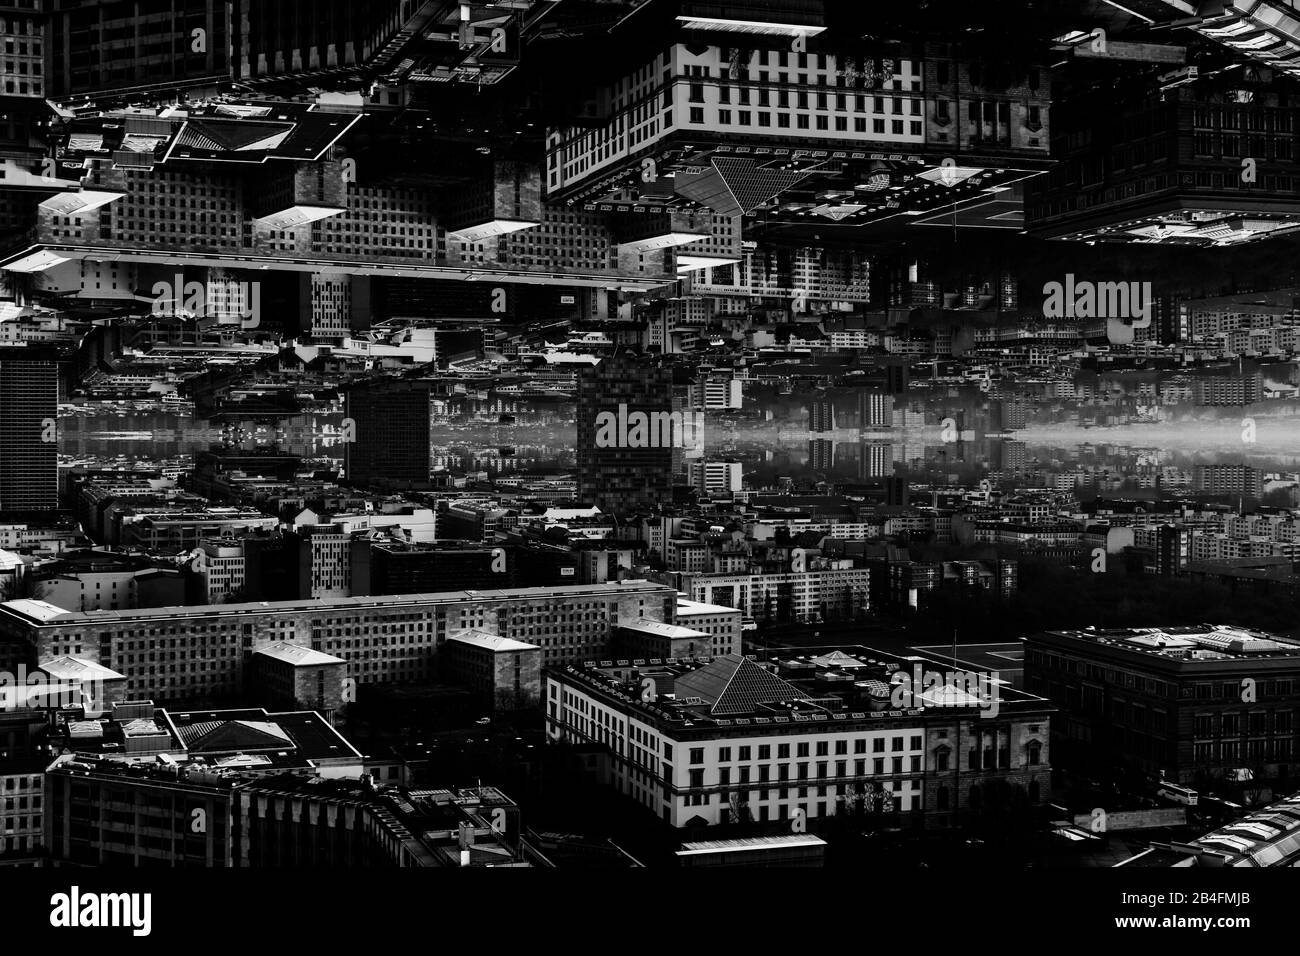 Panoramic view over the roofs of Berlin, mirrored a surreal look Stock Photo